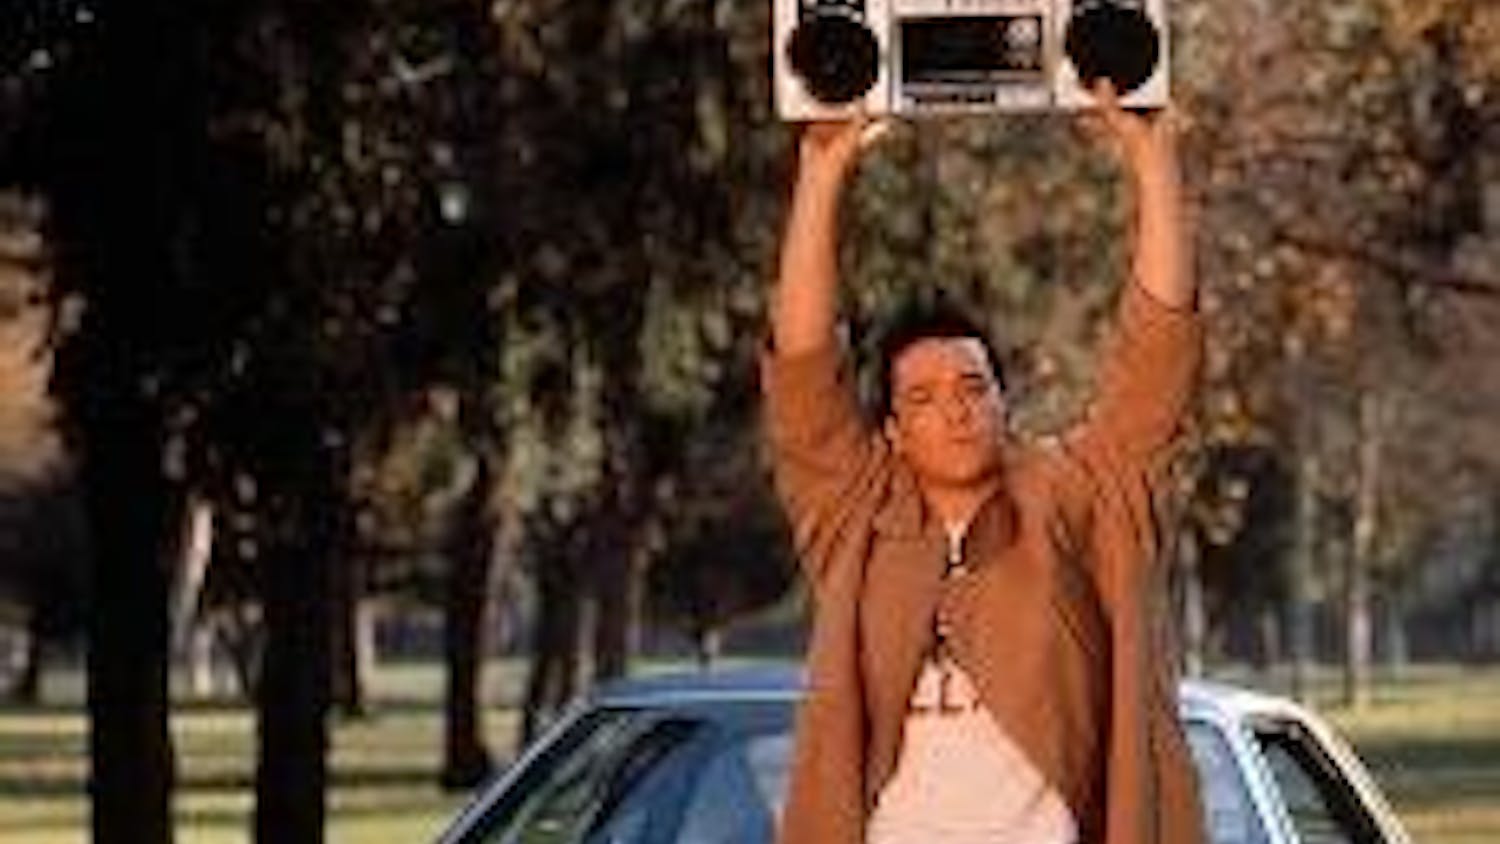 BEAT OF MY HEART - John Cusack's love-ridden character in "Say Anything" is one of many to take to the silver screen at AFI Silver Theatre for their Valentine's Day lineup. Other romantic classics include Casablanca, It Happened one night, and An Affair t